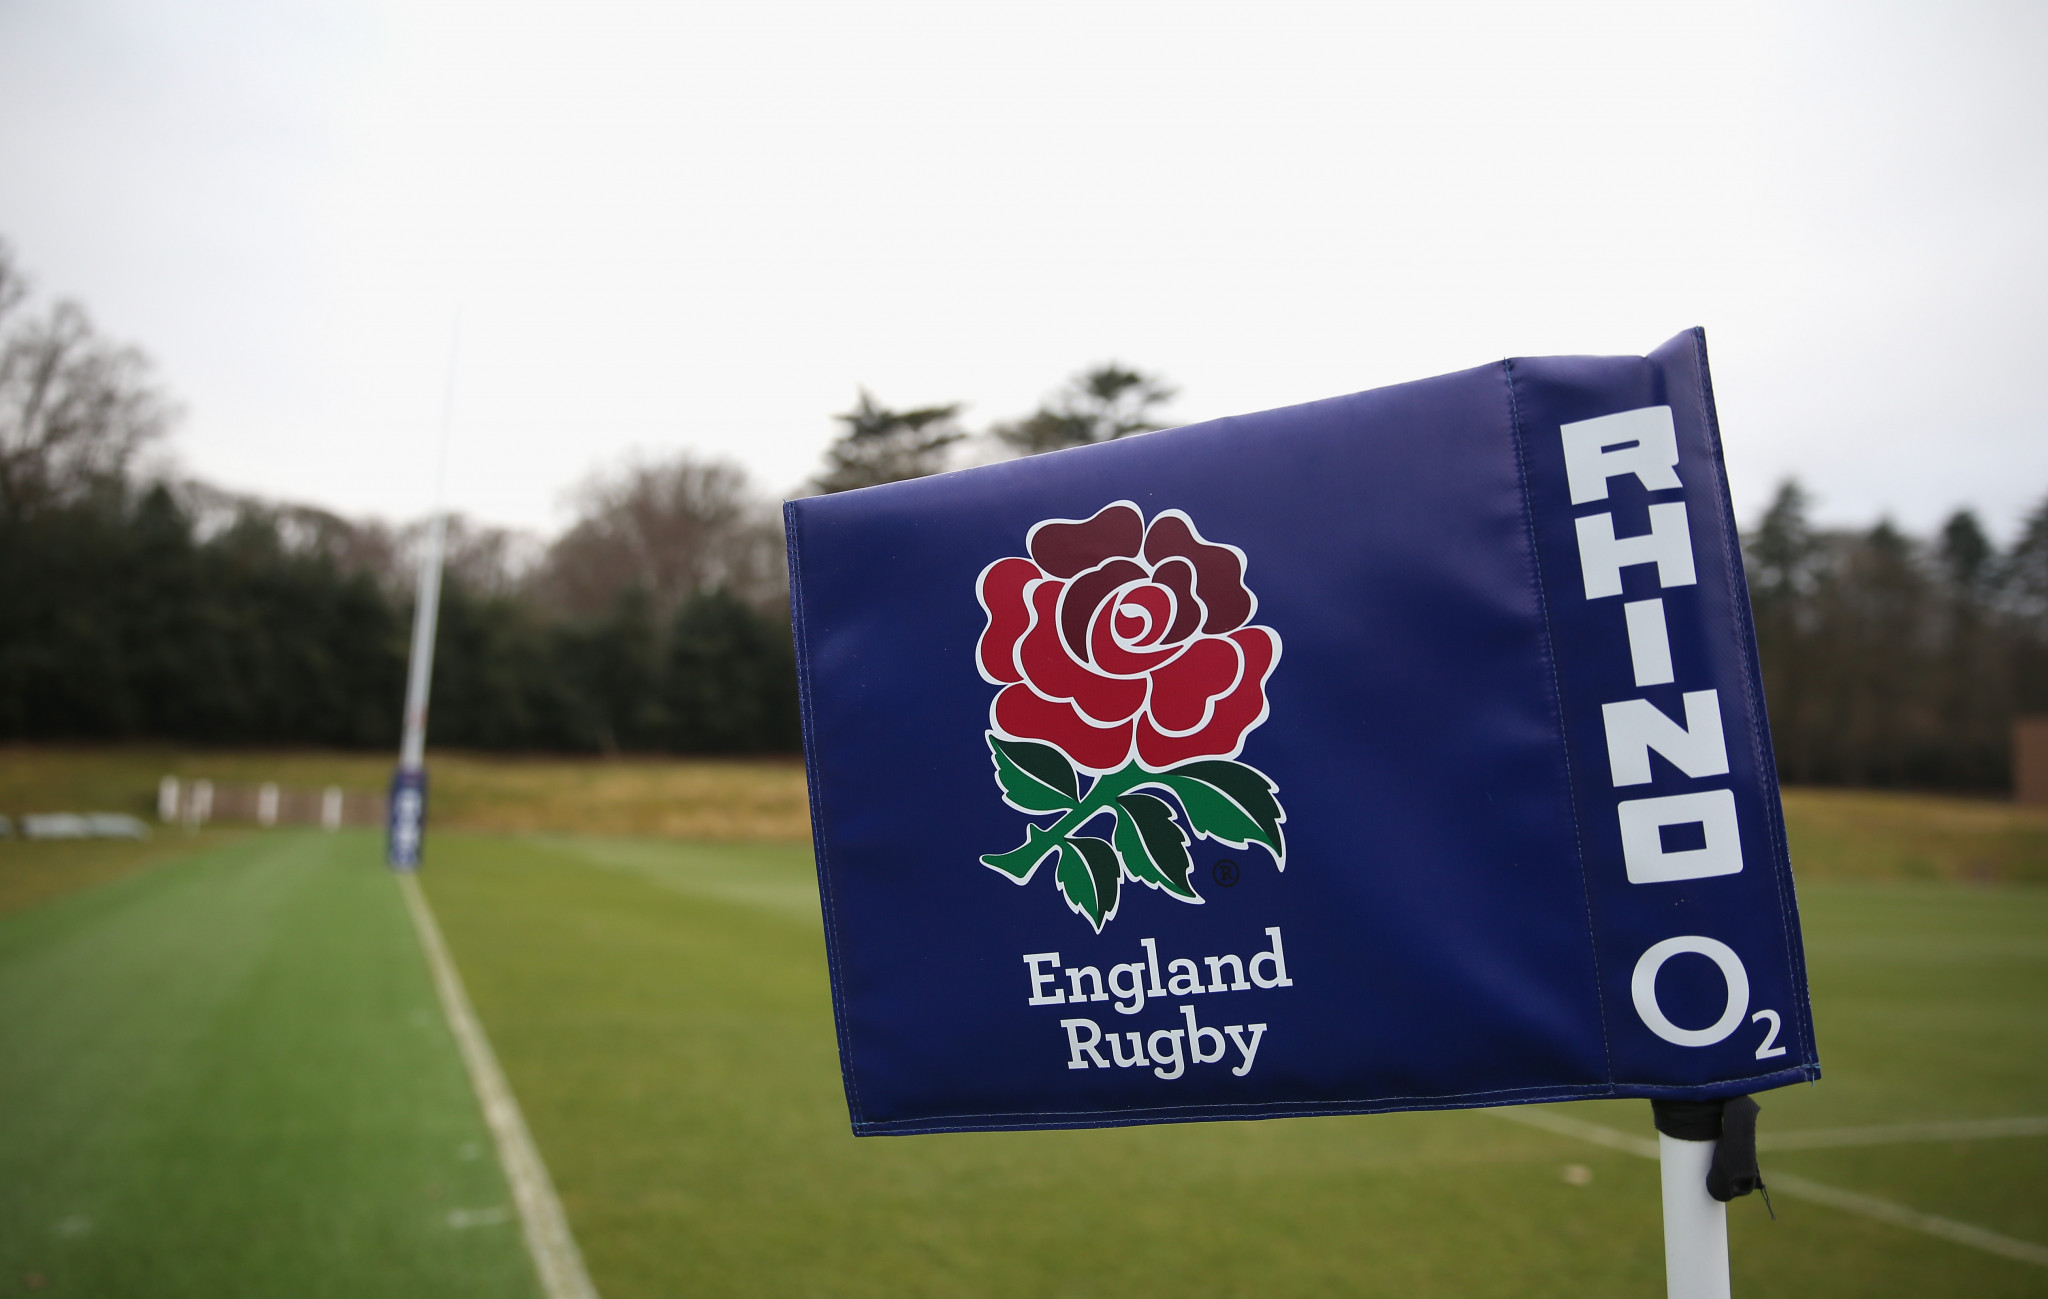 RFU to submit bid for Women's Rugby World Cup 2025 